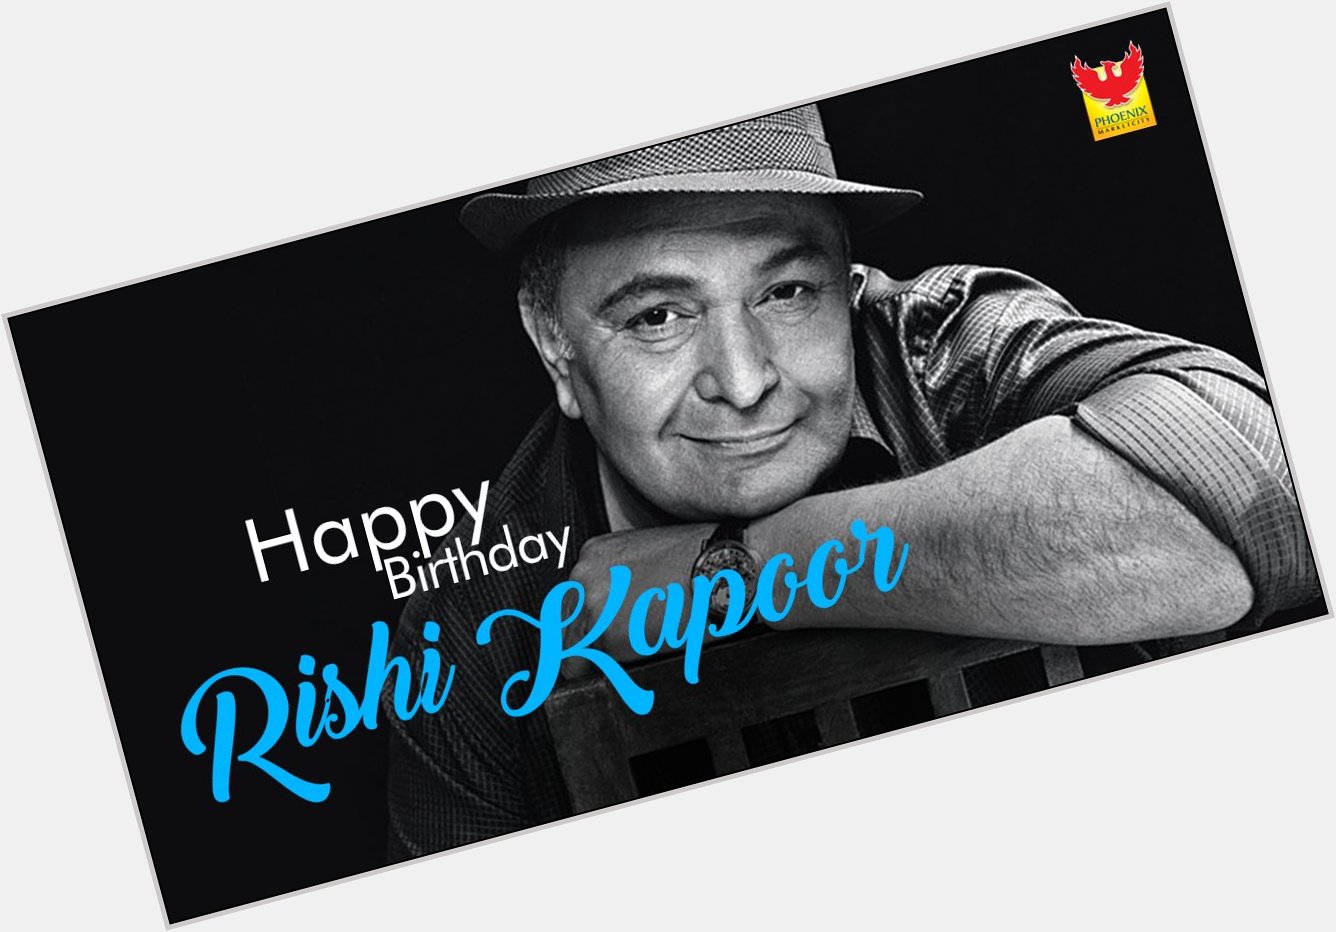 Happy birthday to the \Chintu\ of Bollywood - None other than Mr. Rishi Kapoor ( himself! 